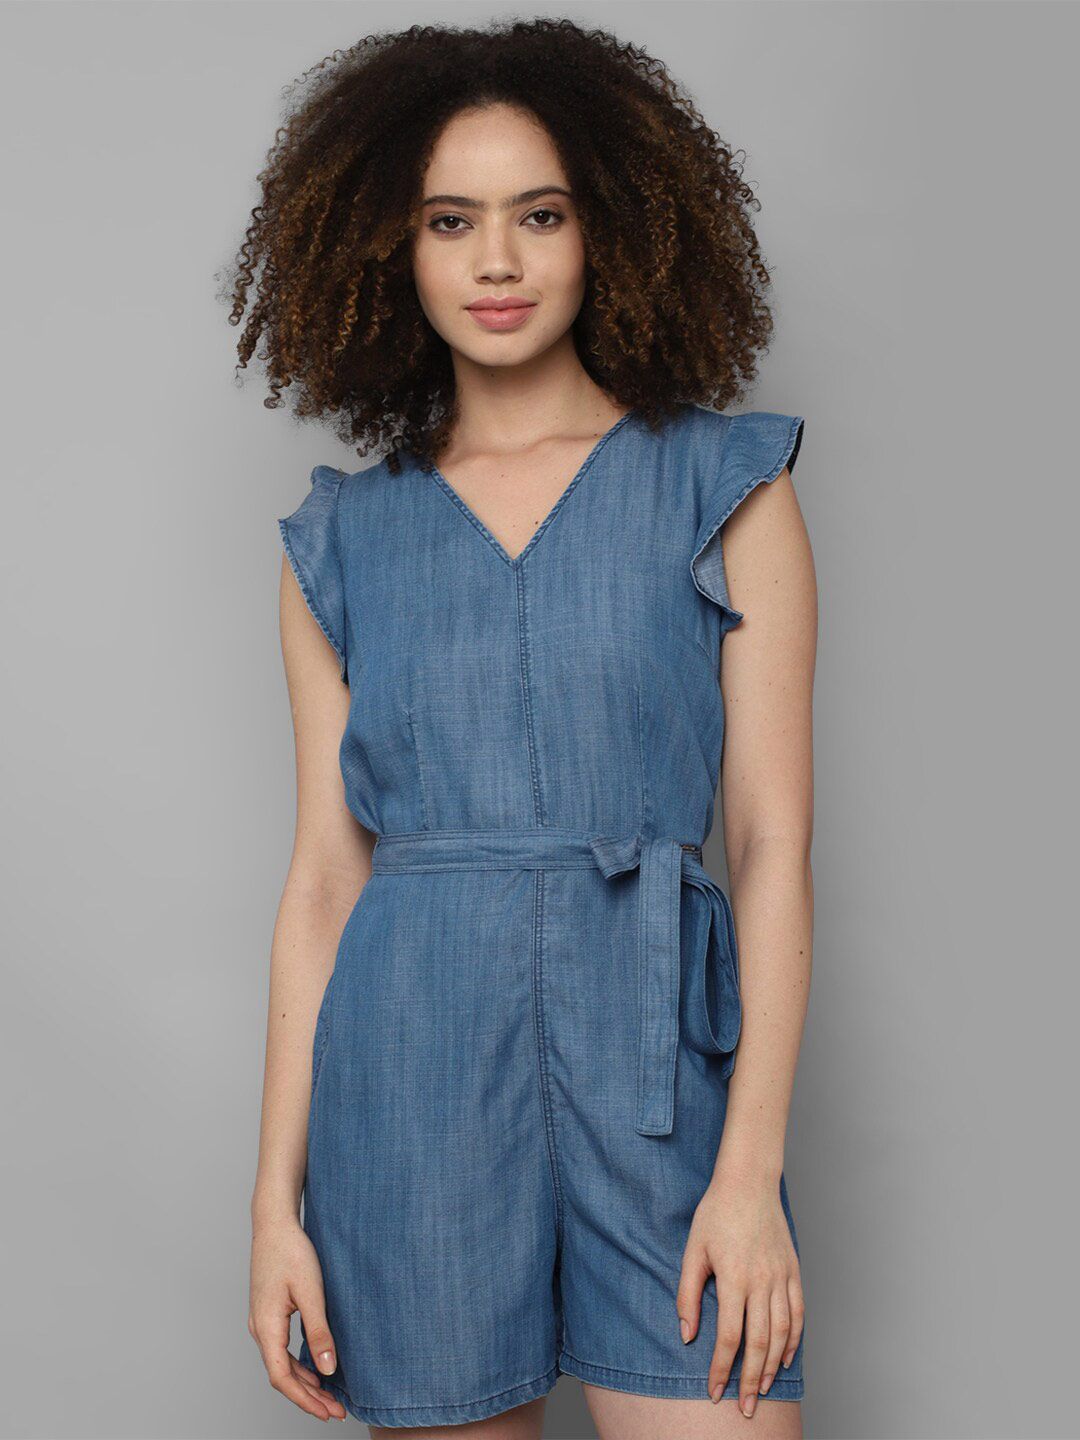 Allen Solly Woman Blue Jumpsuit Price in India